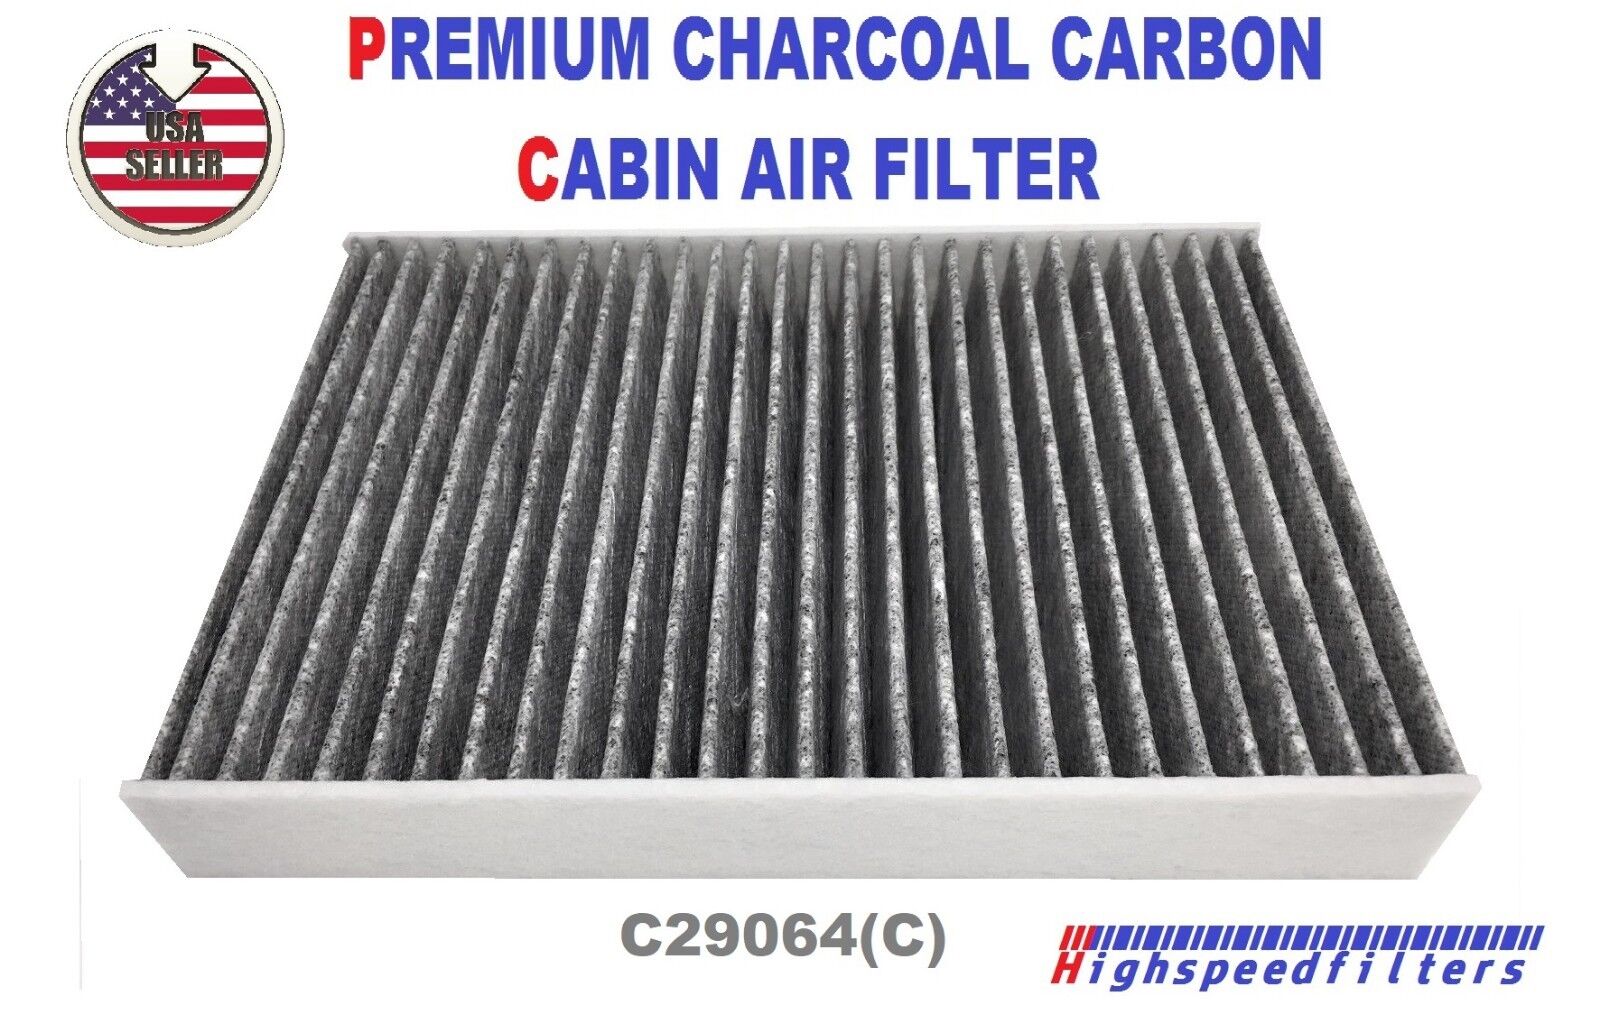 C29064 CHARCOAL Cabin Air Filter for 2014 -20 NISSAN Rogue & 2017-21 Rogue Sport